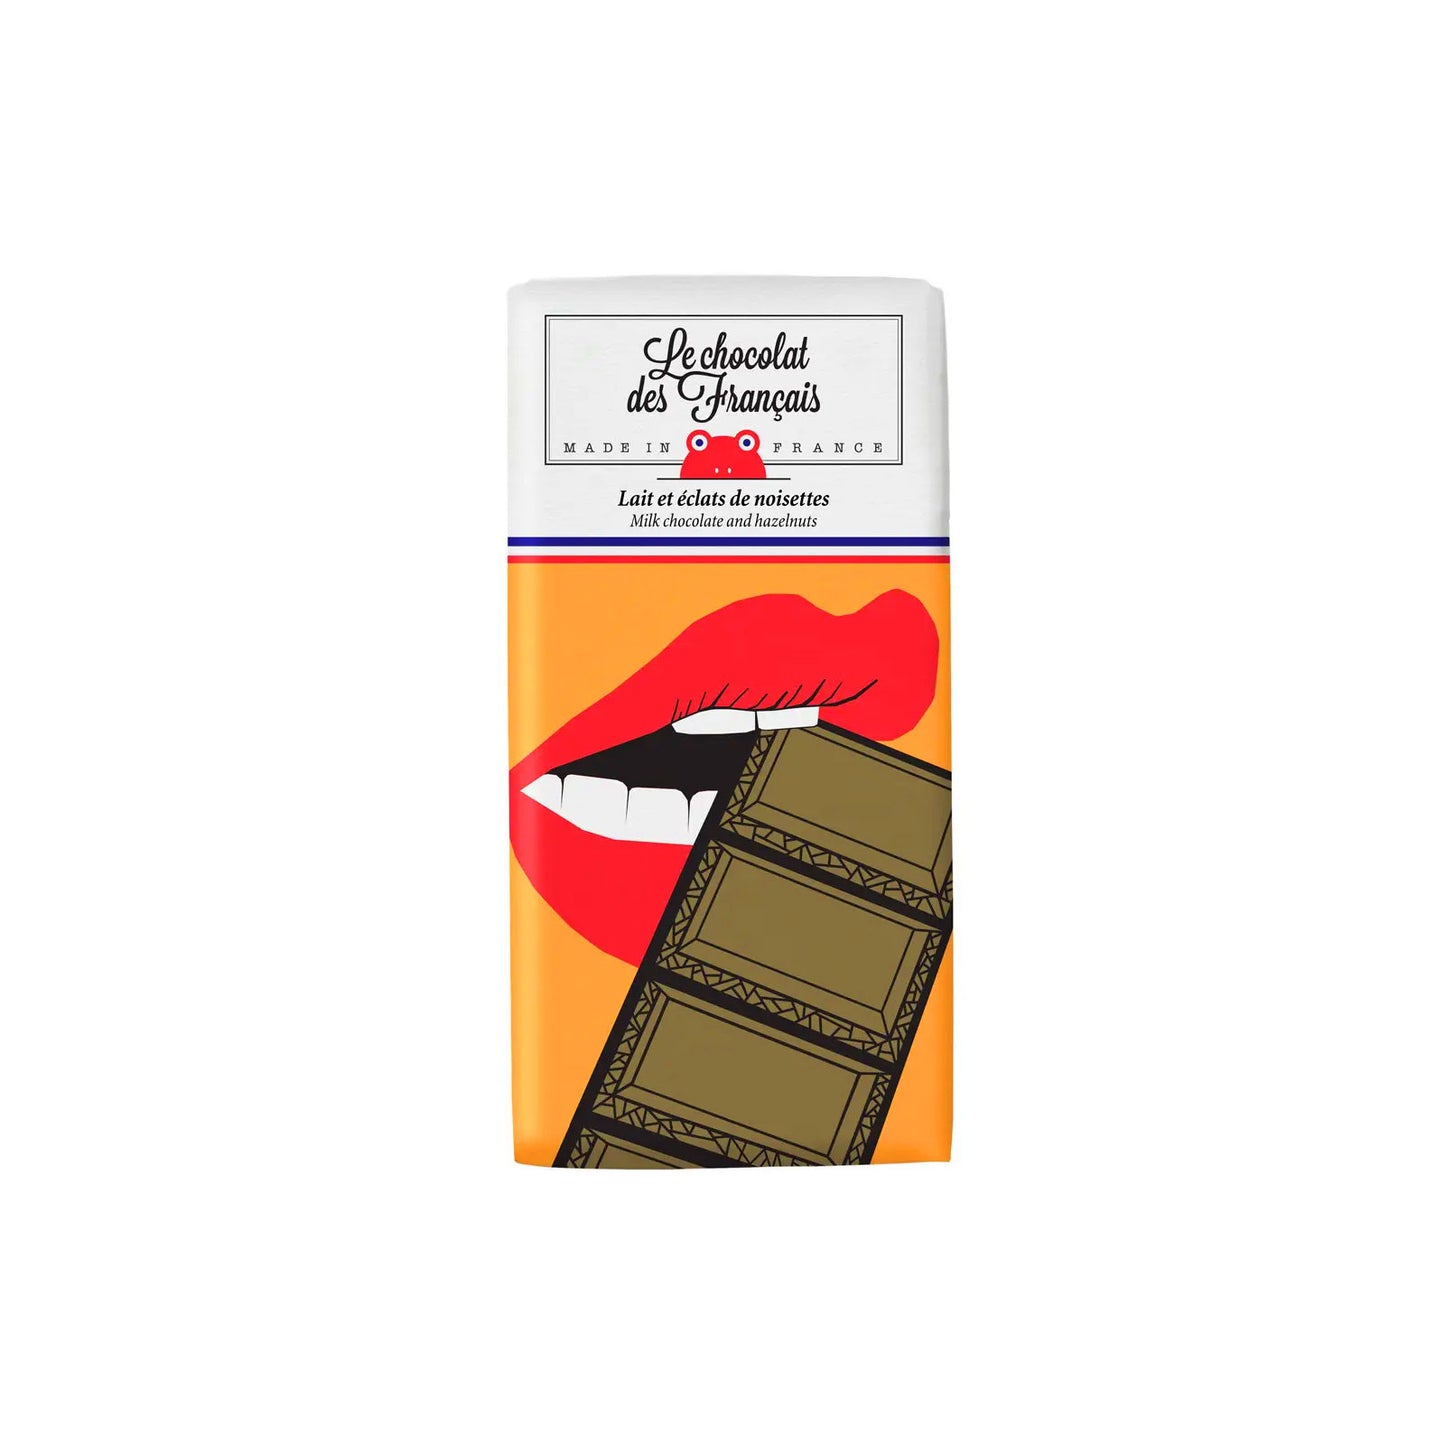 Le Chocolat des Francais Milk Chocolate Bar with Hazelnuts, The Mouth